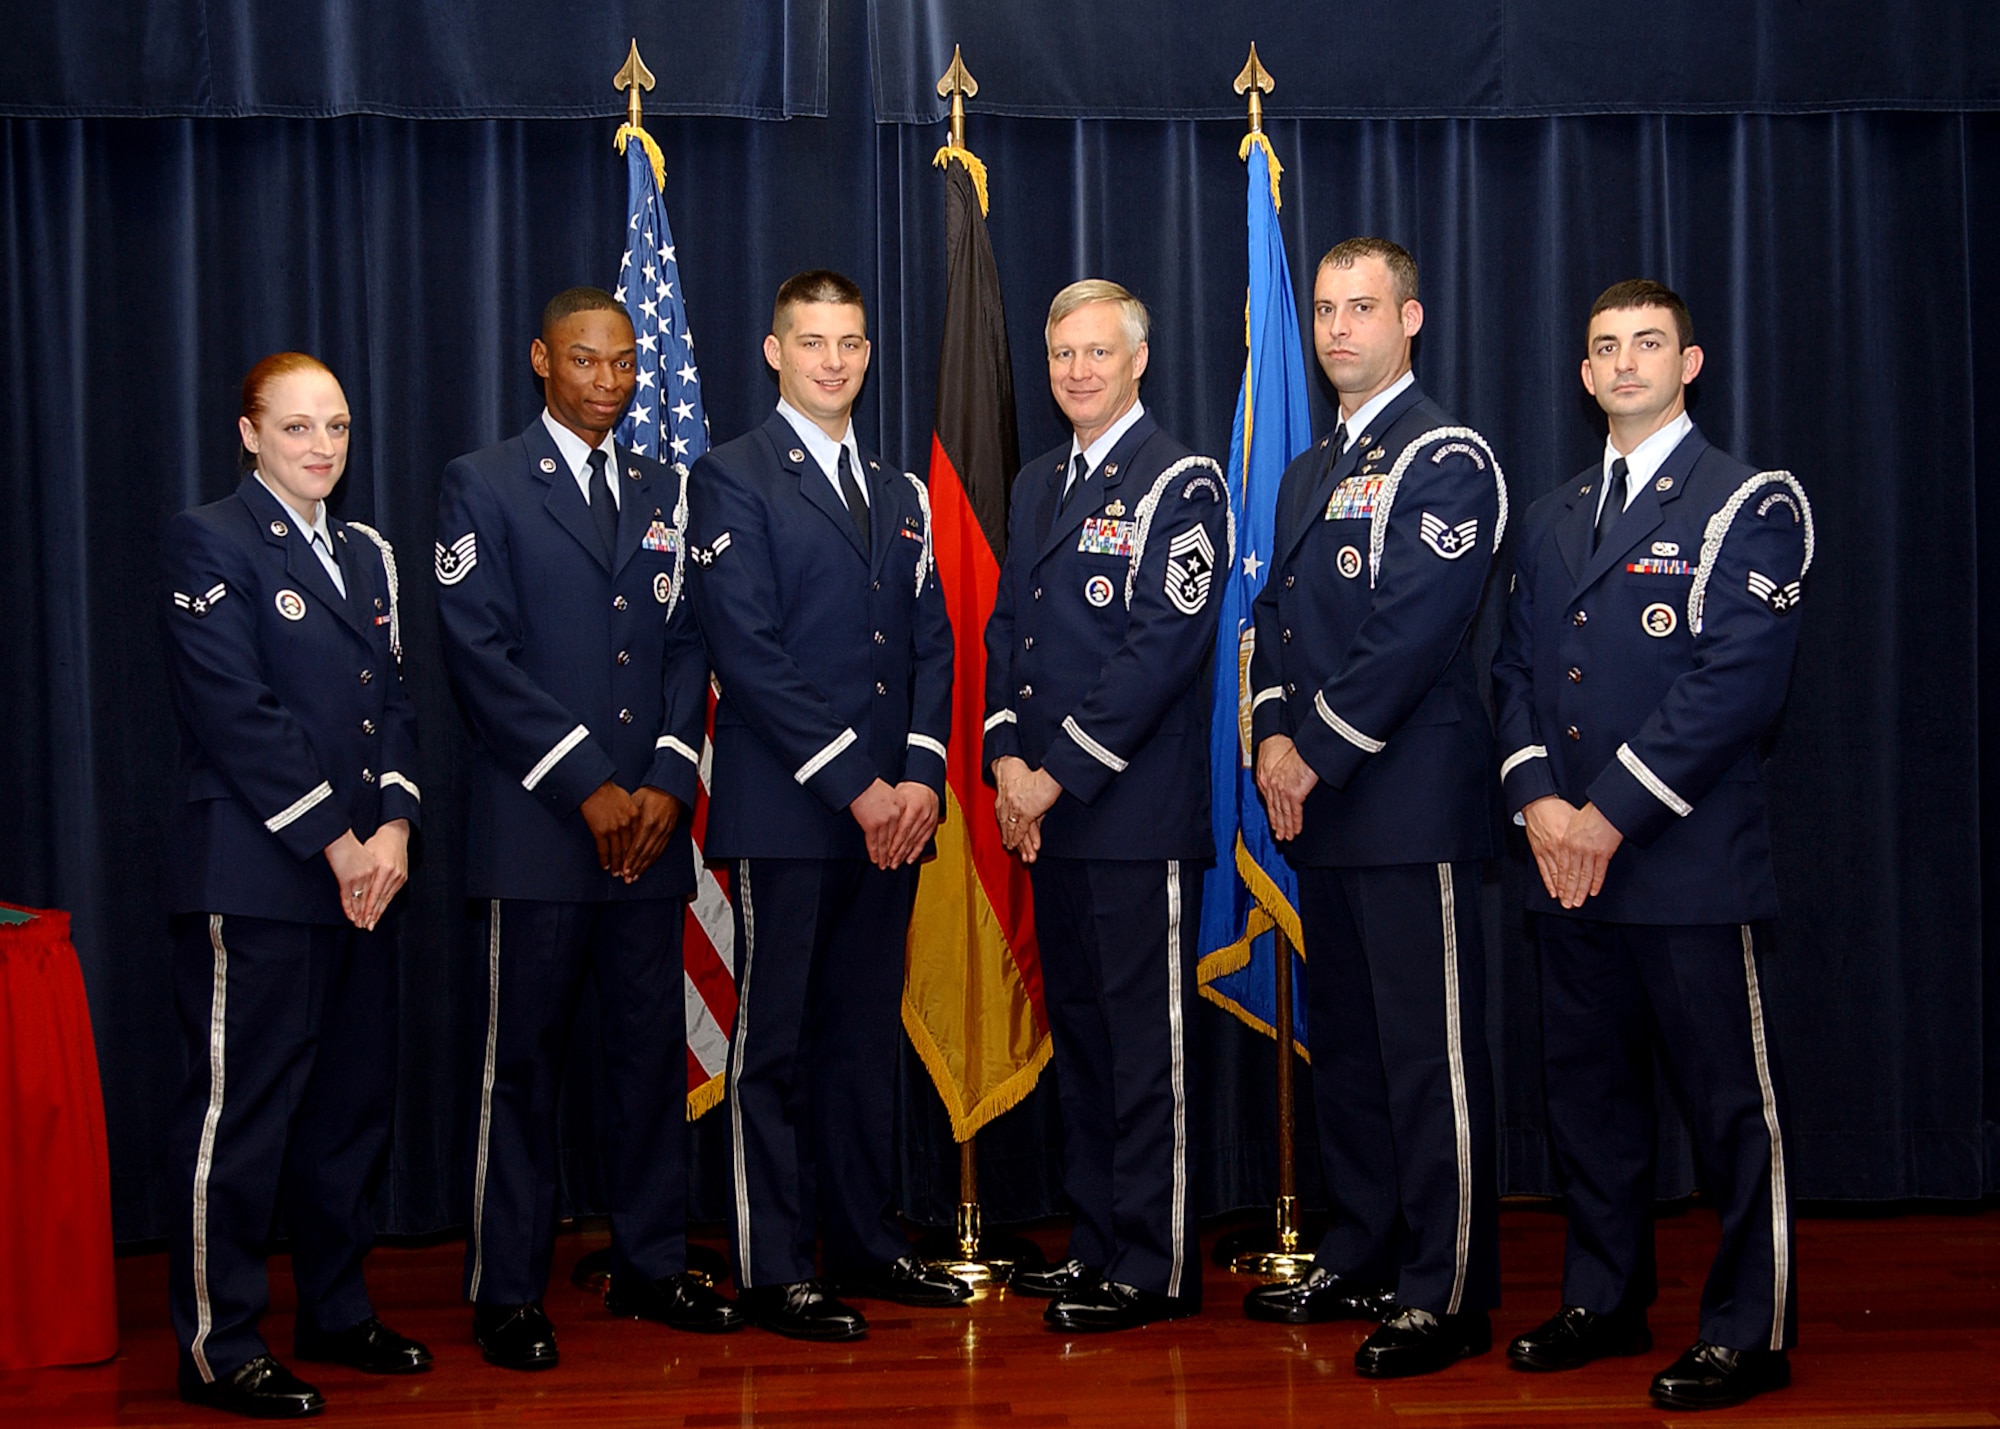 Chief Master Sgt. Vance Clarke, 52nd Fighter Wing command chief, stands in line with members of the Spangdahlem Honor Guard team Oct. 30. Chief Clarke spent the day training with members of the honor guard team to reinforce the importance the duty and encourage supervisors allow their Airmen the ability to participate on the honor guard. (U.S. Air Force photo/Airman 1st Class Allen Pollard) 